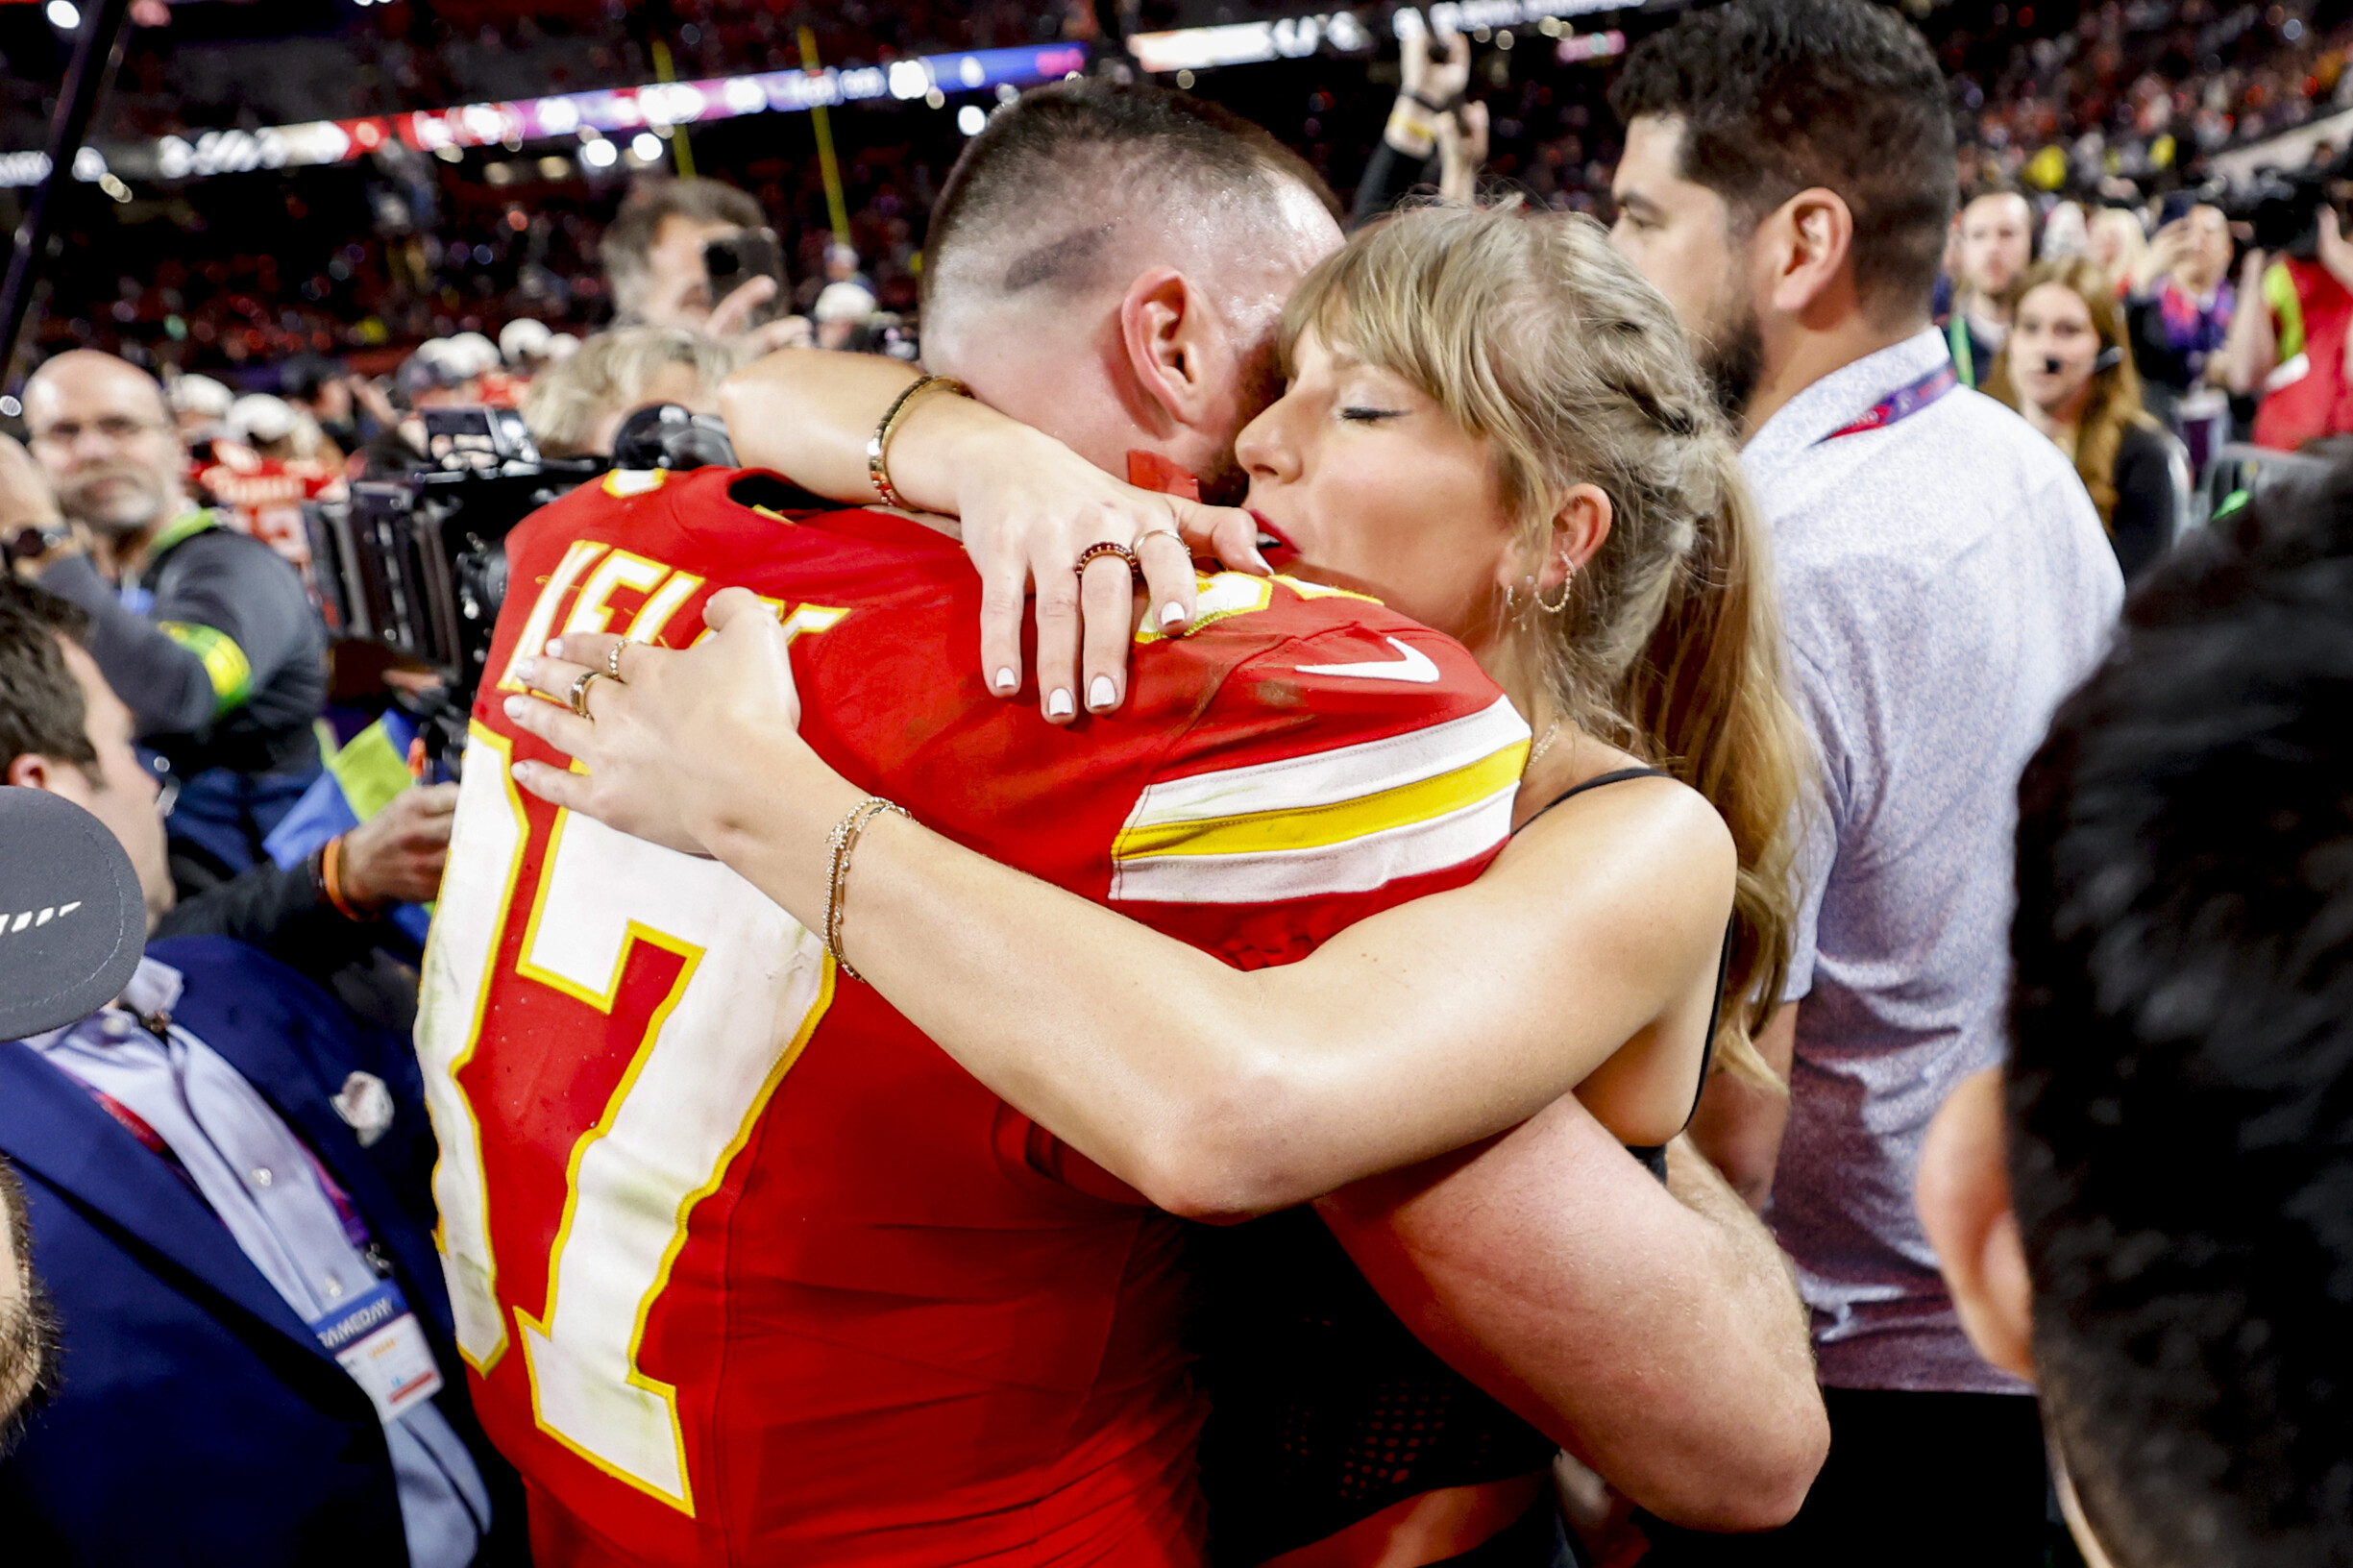 Chiefs run 49ers and retain Super Bowl in overtime